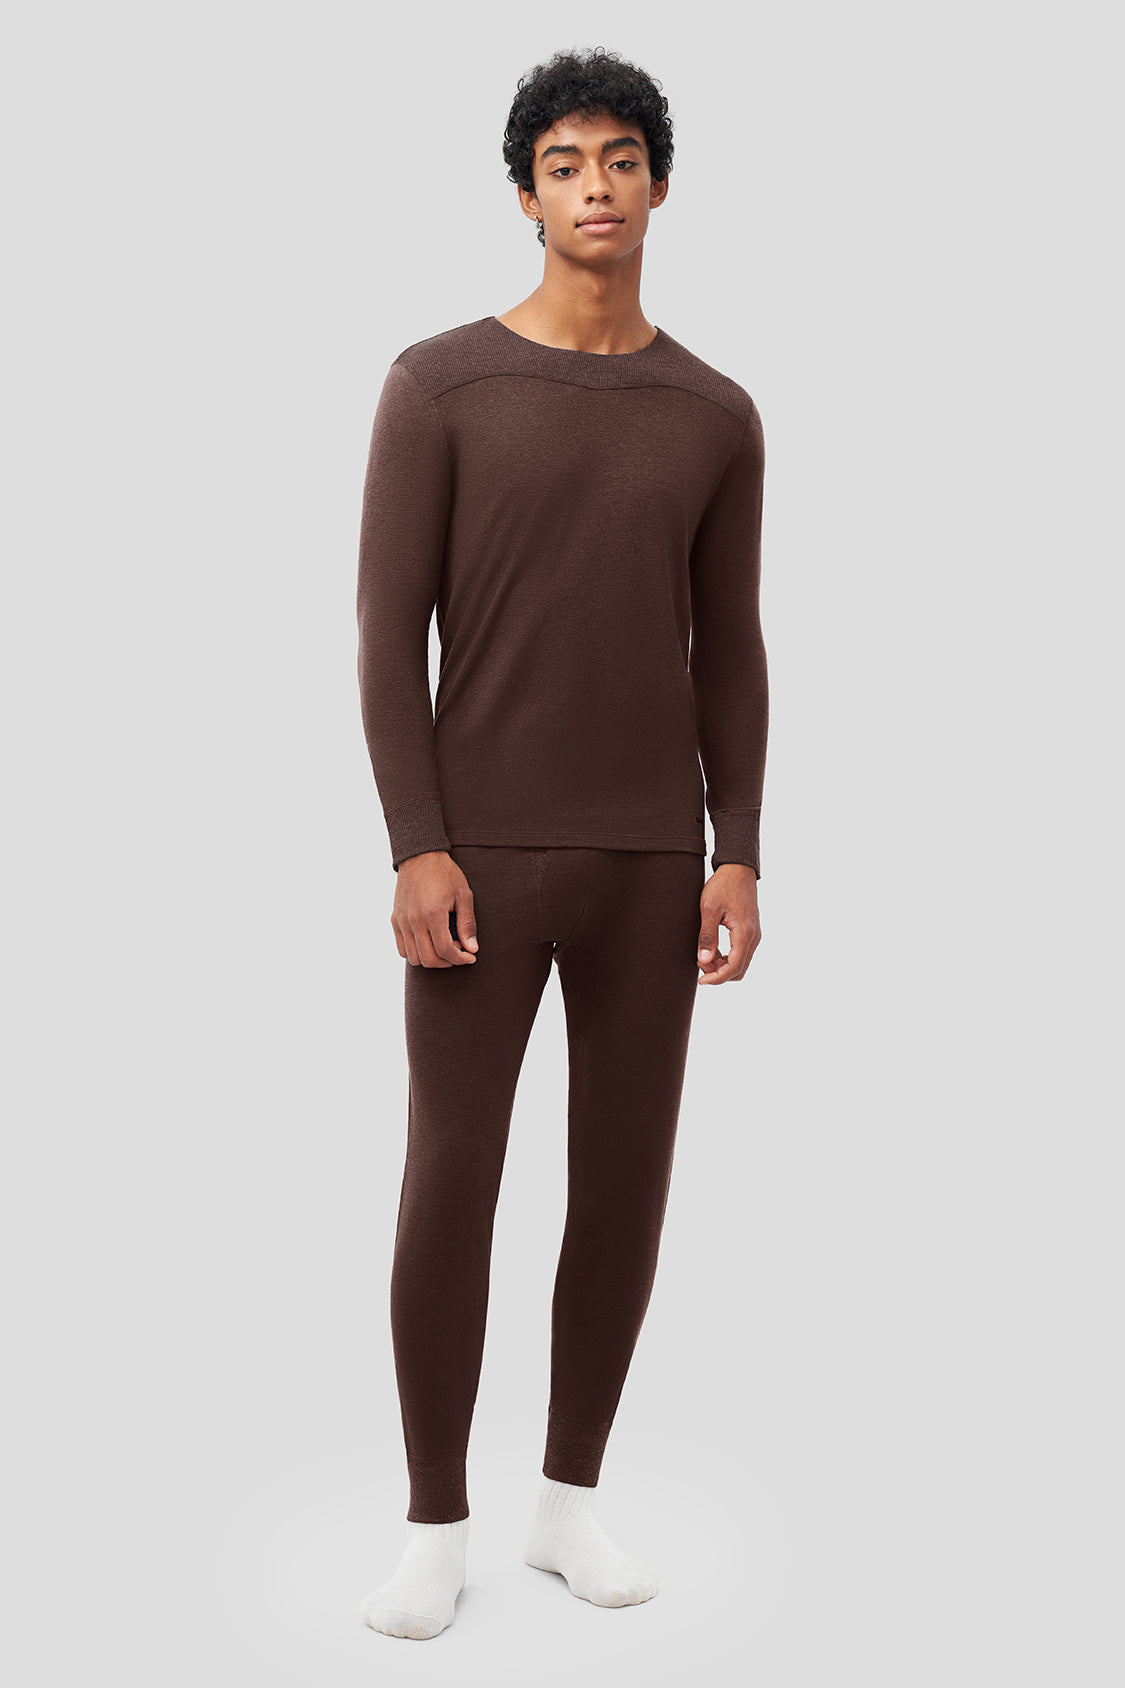 Up To 66% Off on Men's 4-Piece Winter Thermal